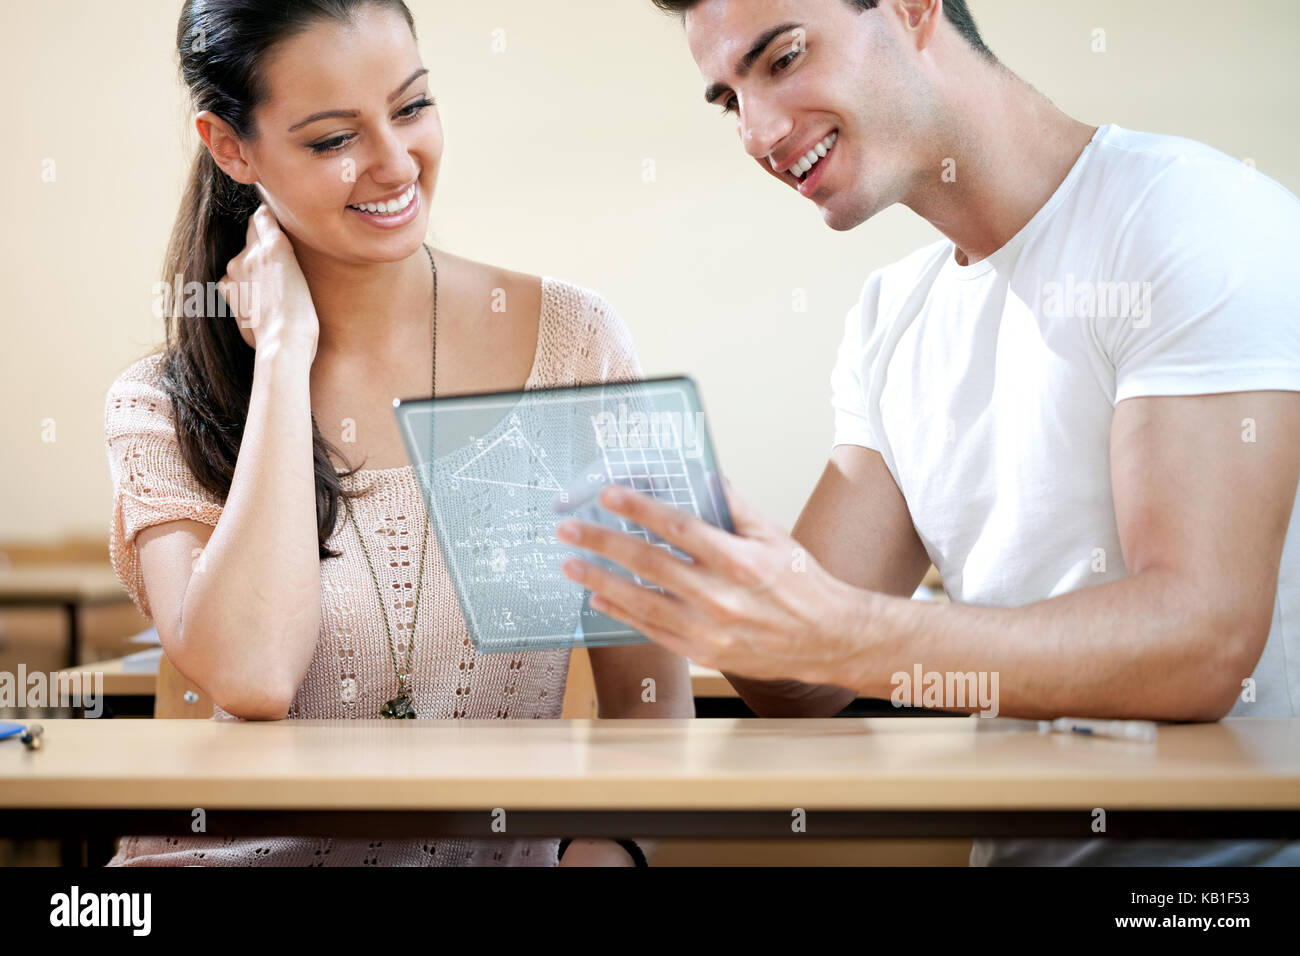 Couple of students using  futuristic digital tablet Stock Photo